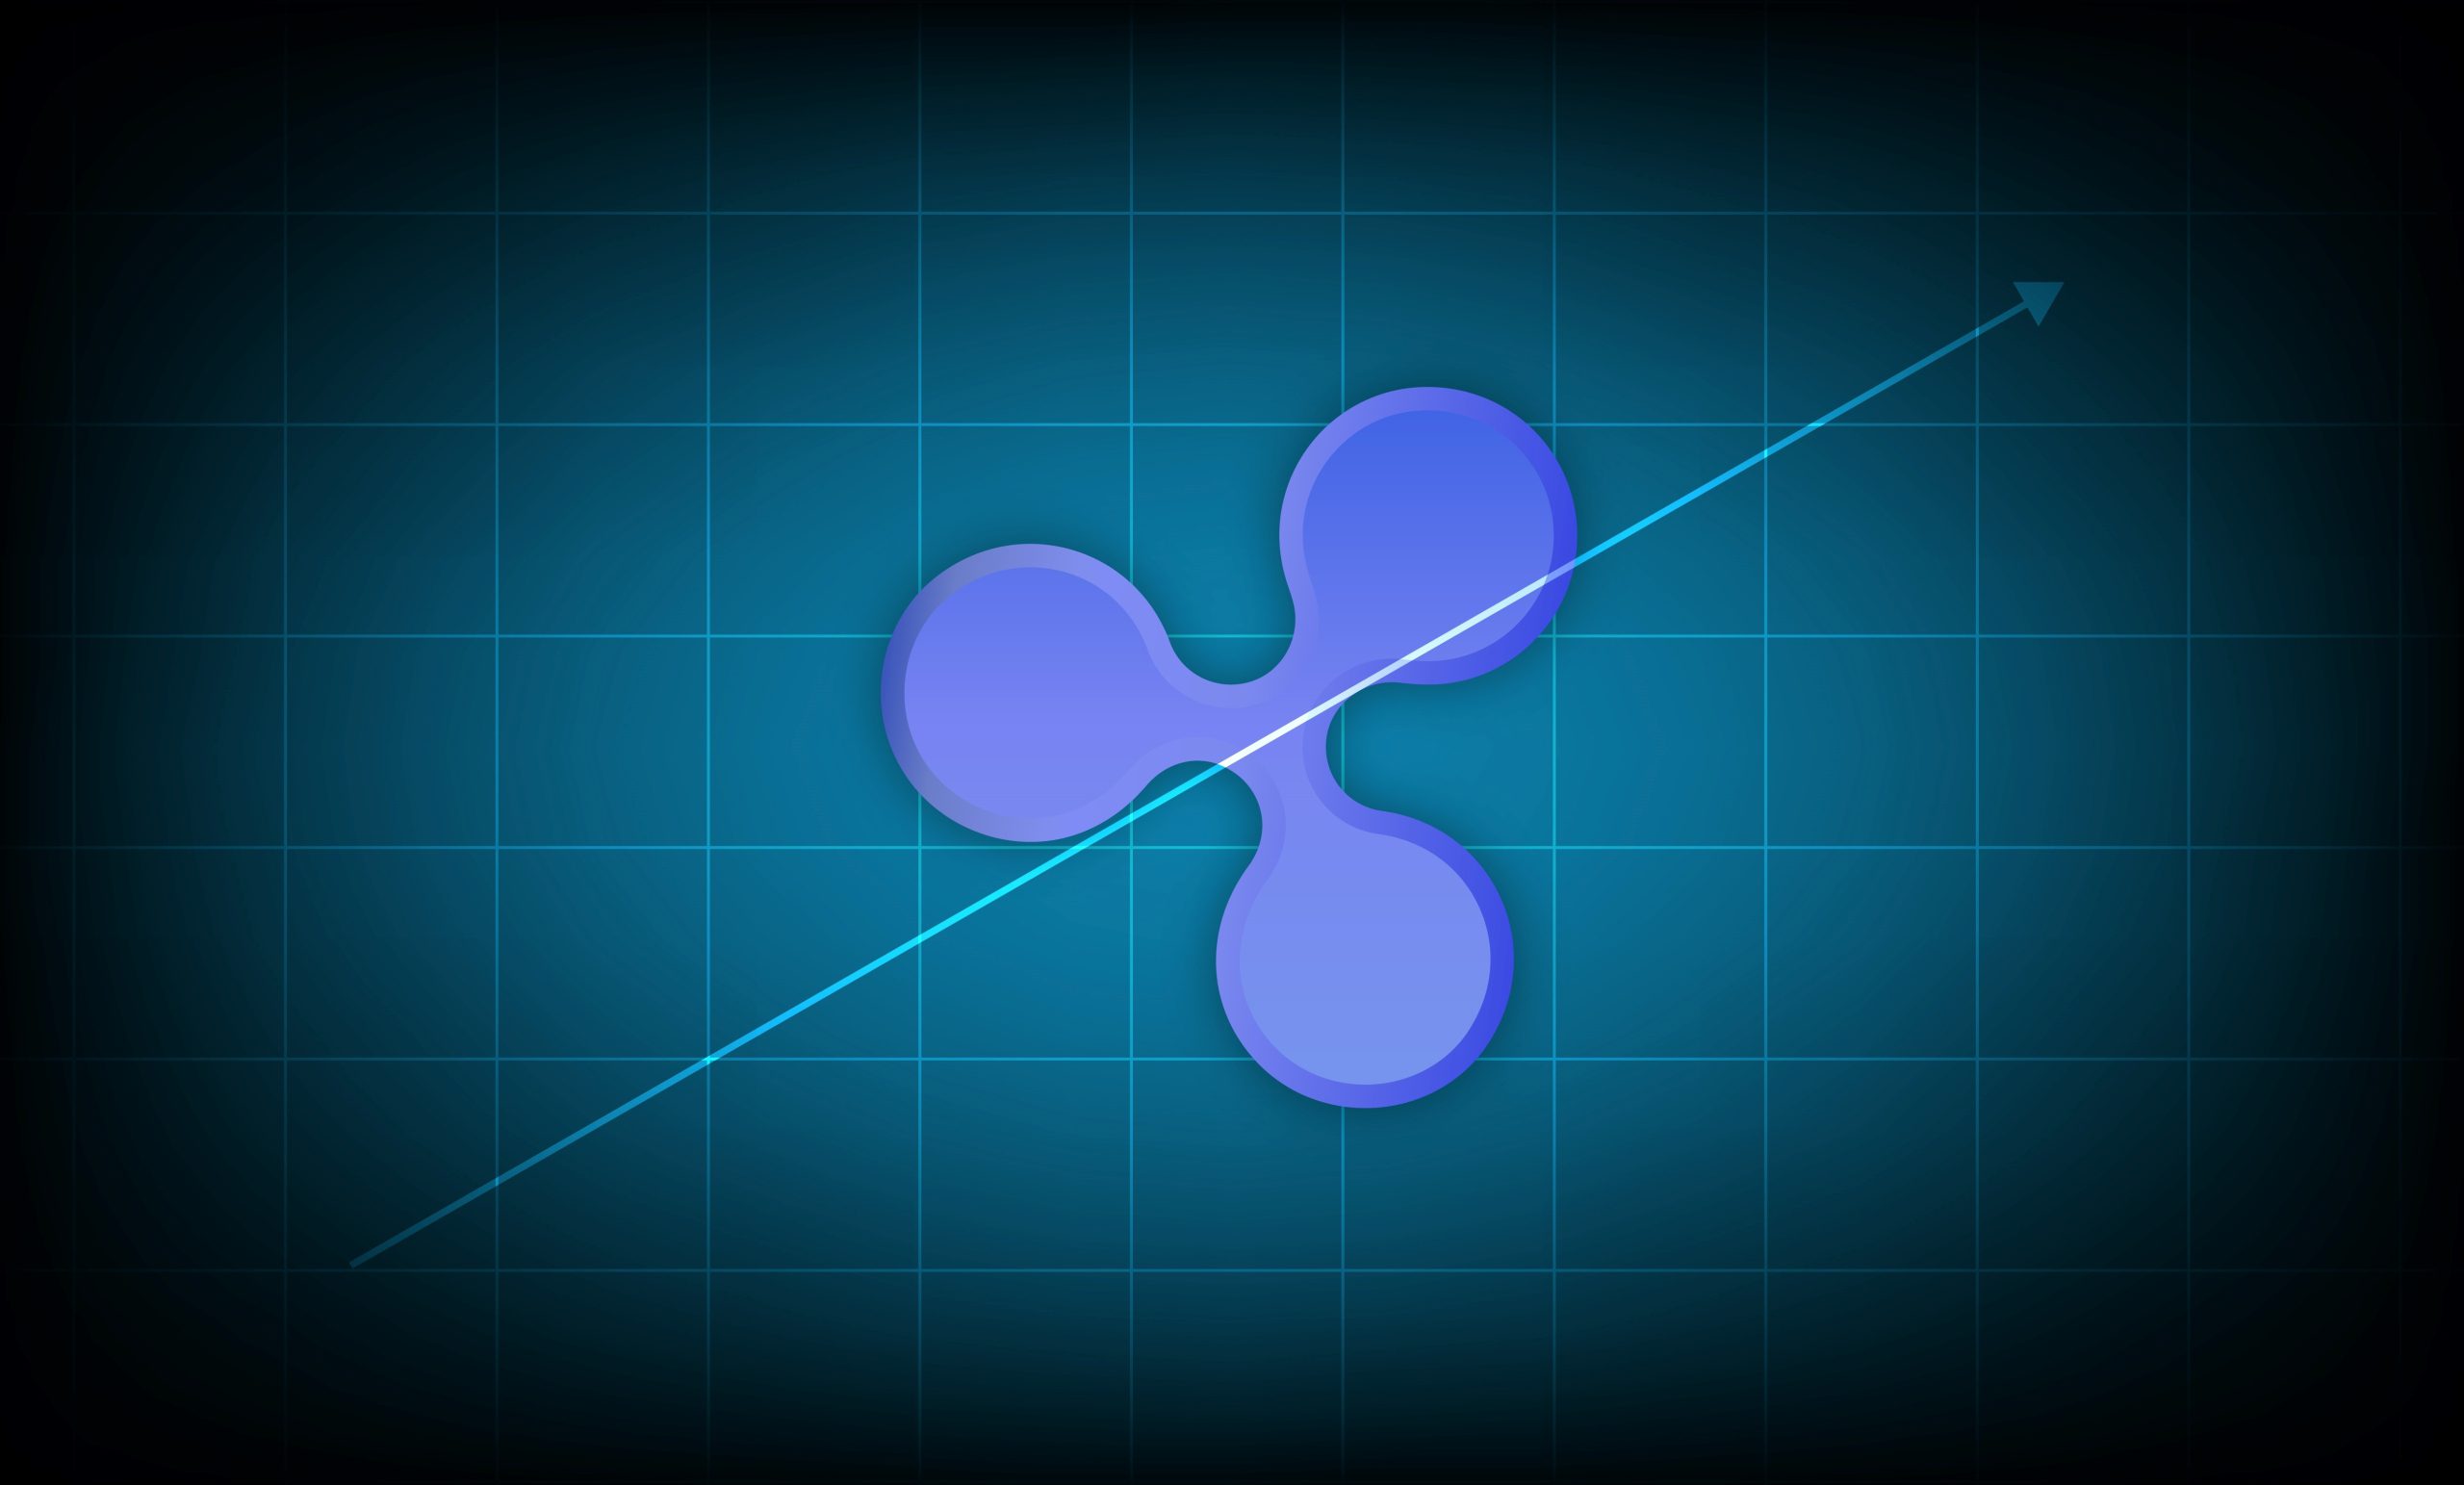 XRP price rises as SEC wants to abandon legal battle
